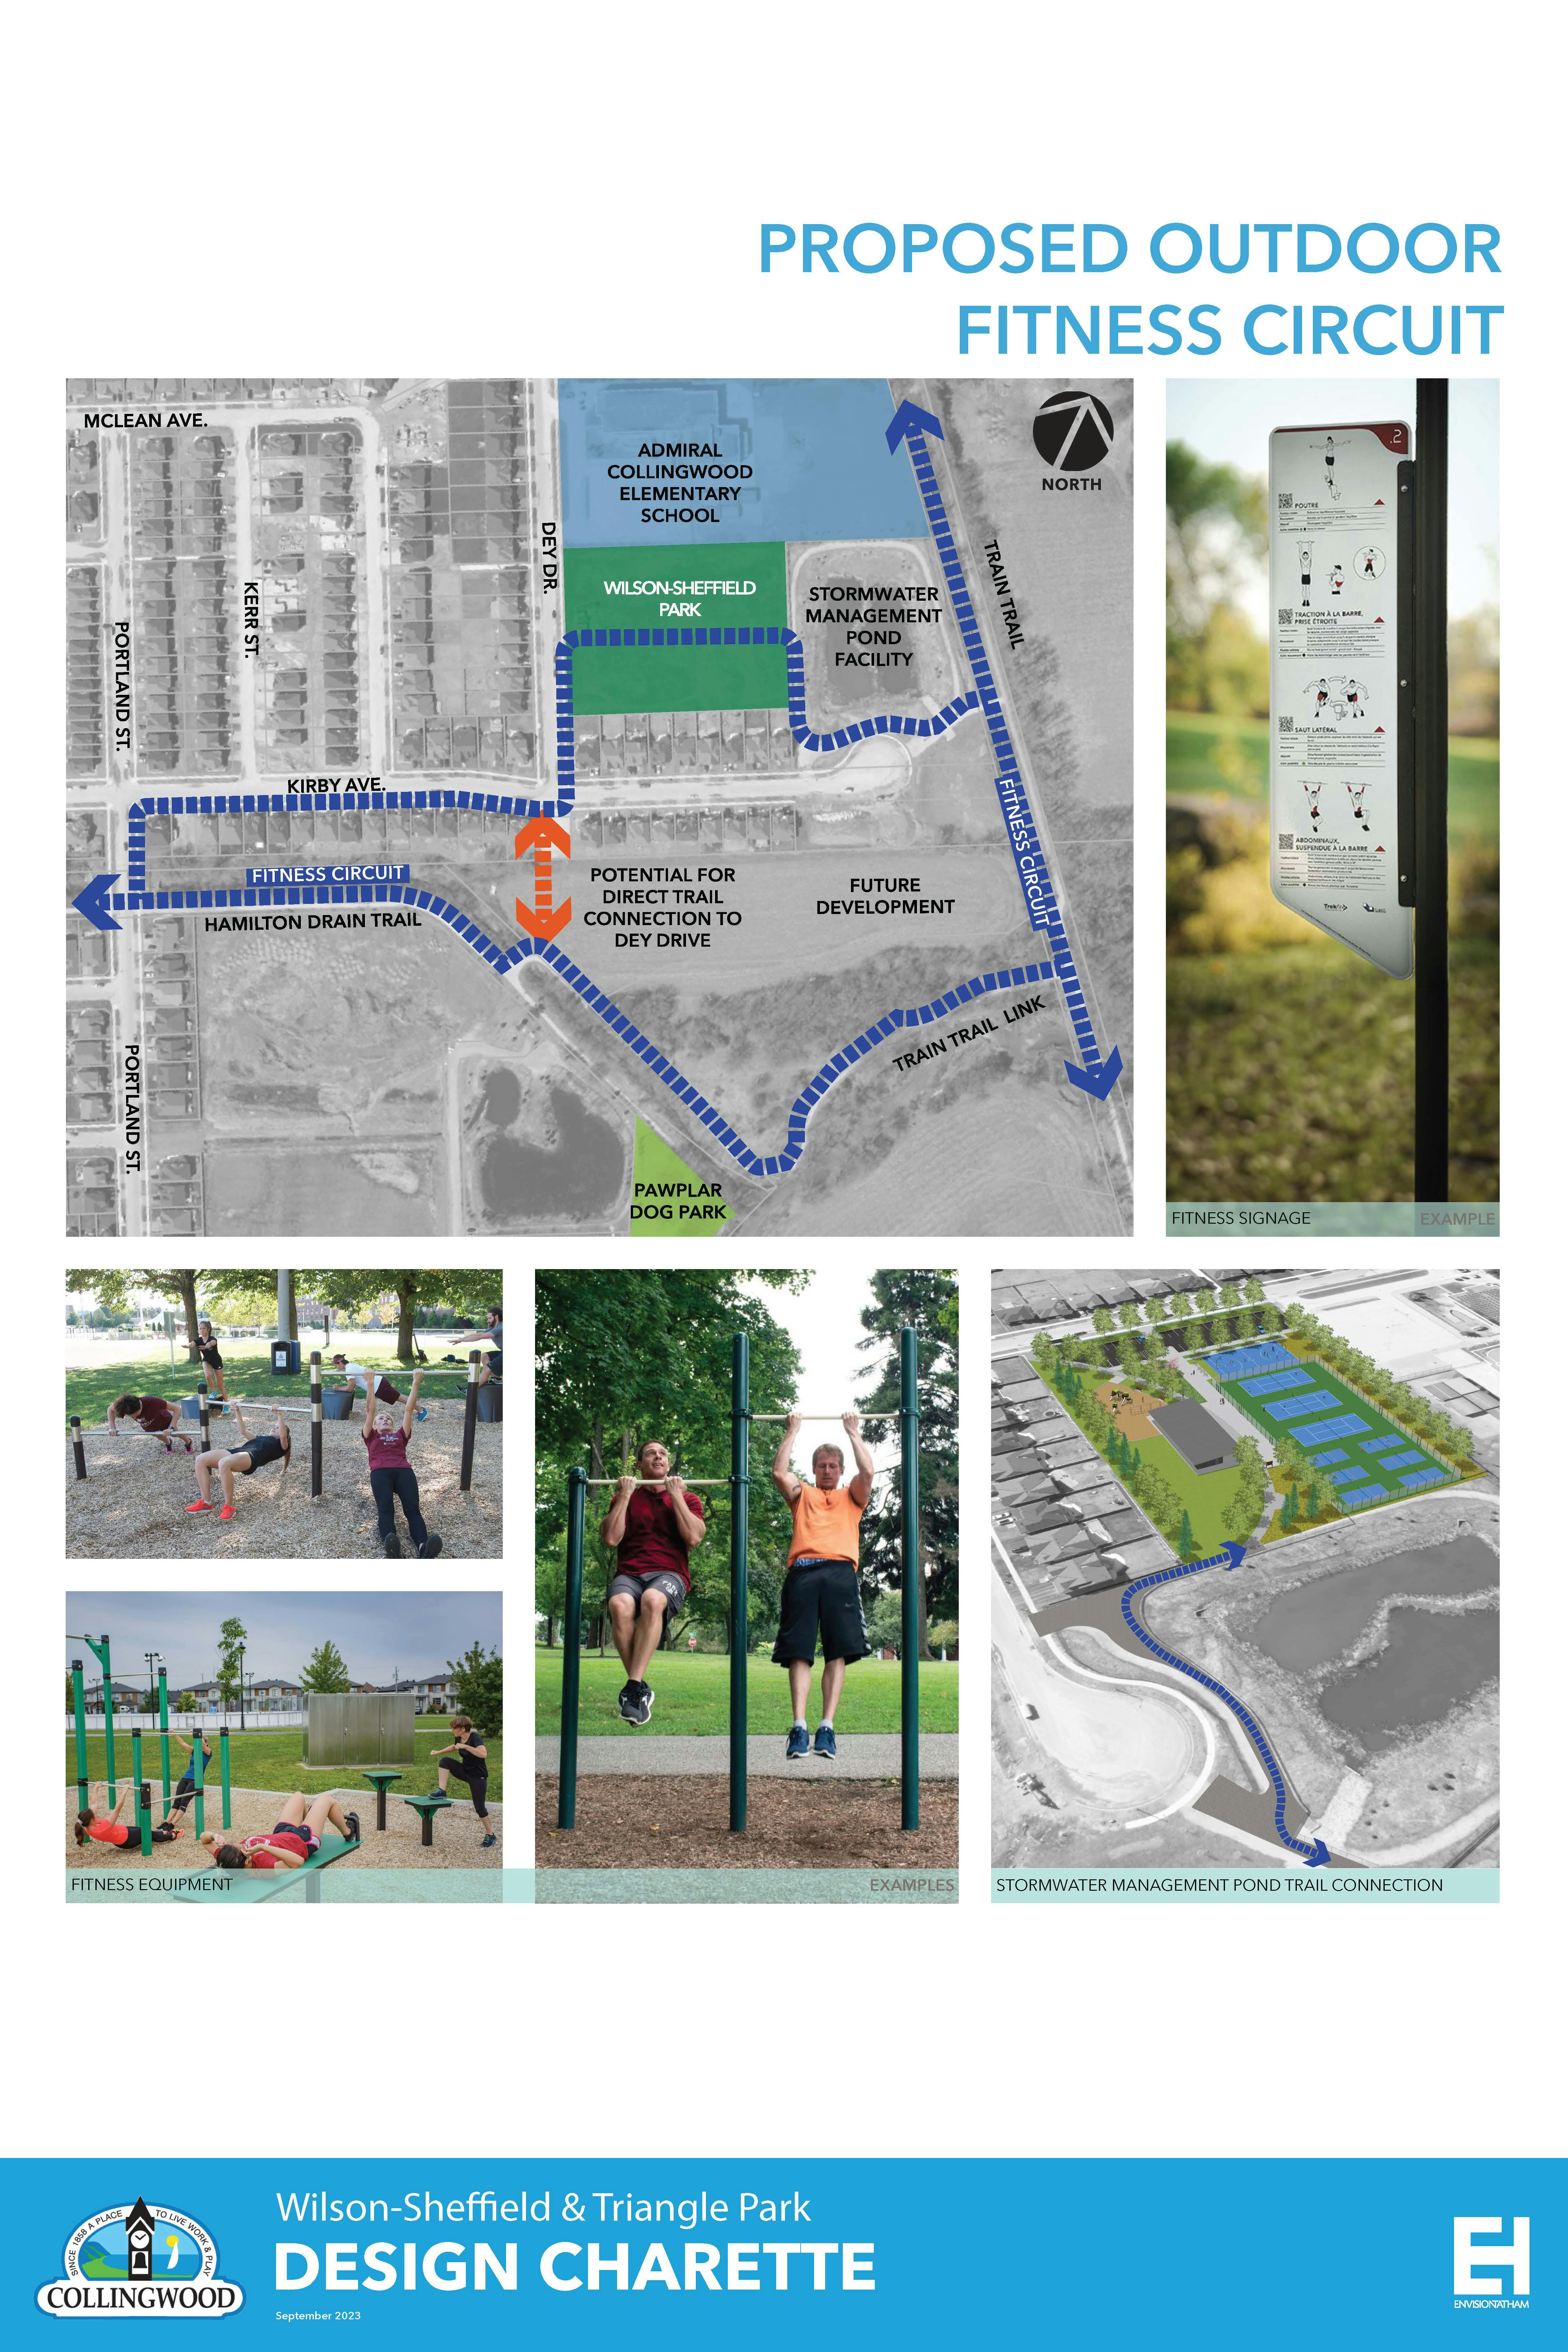 Proposed fitness loop marked in blue.